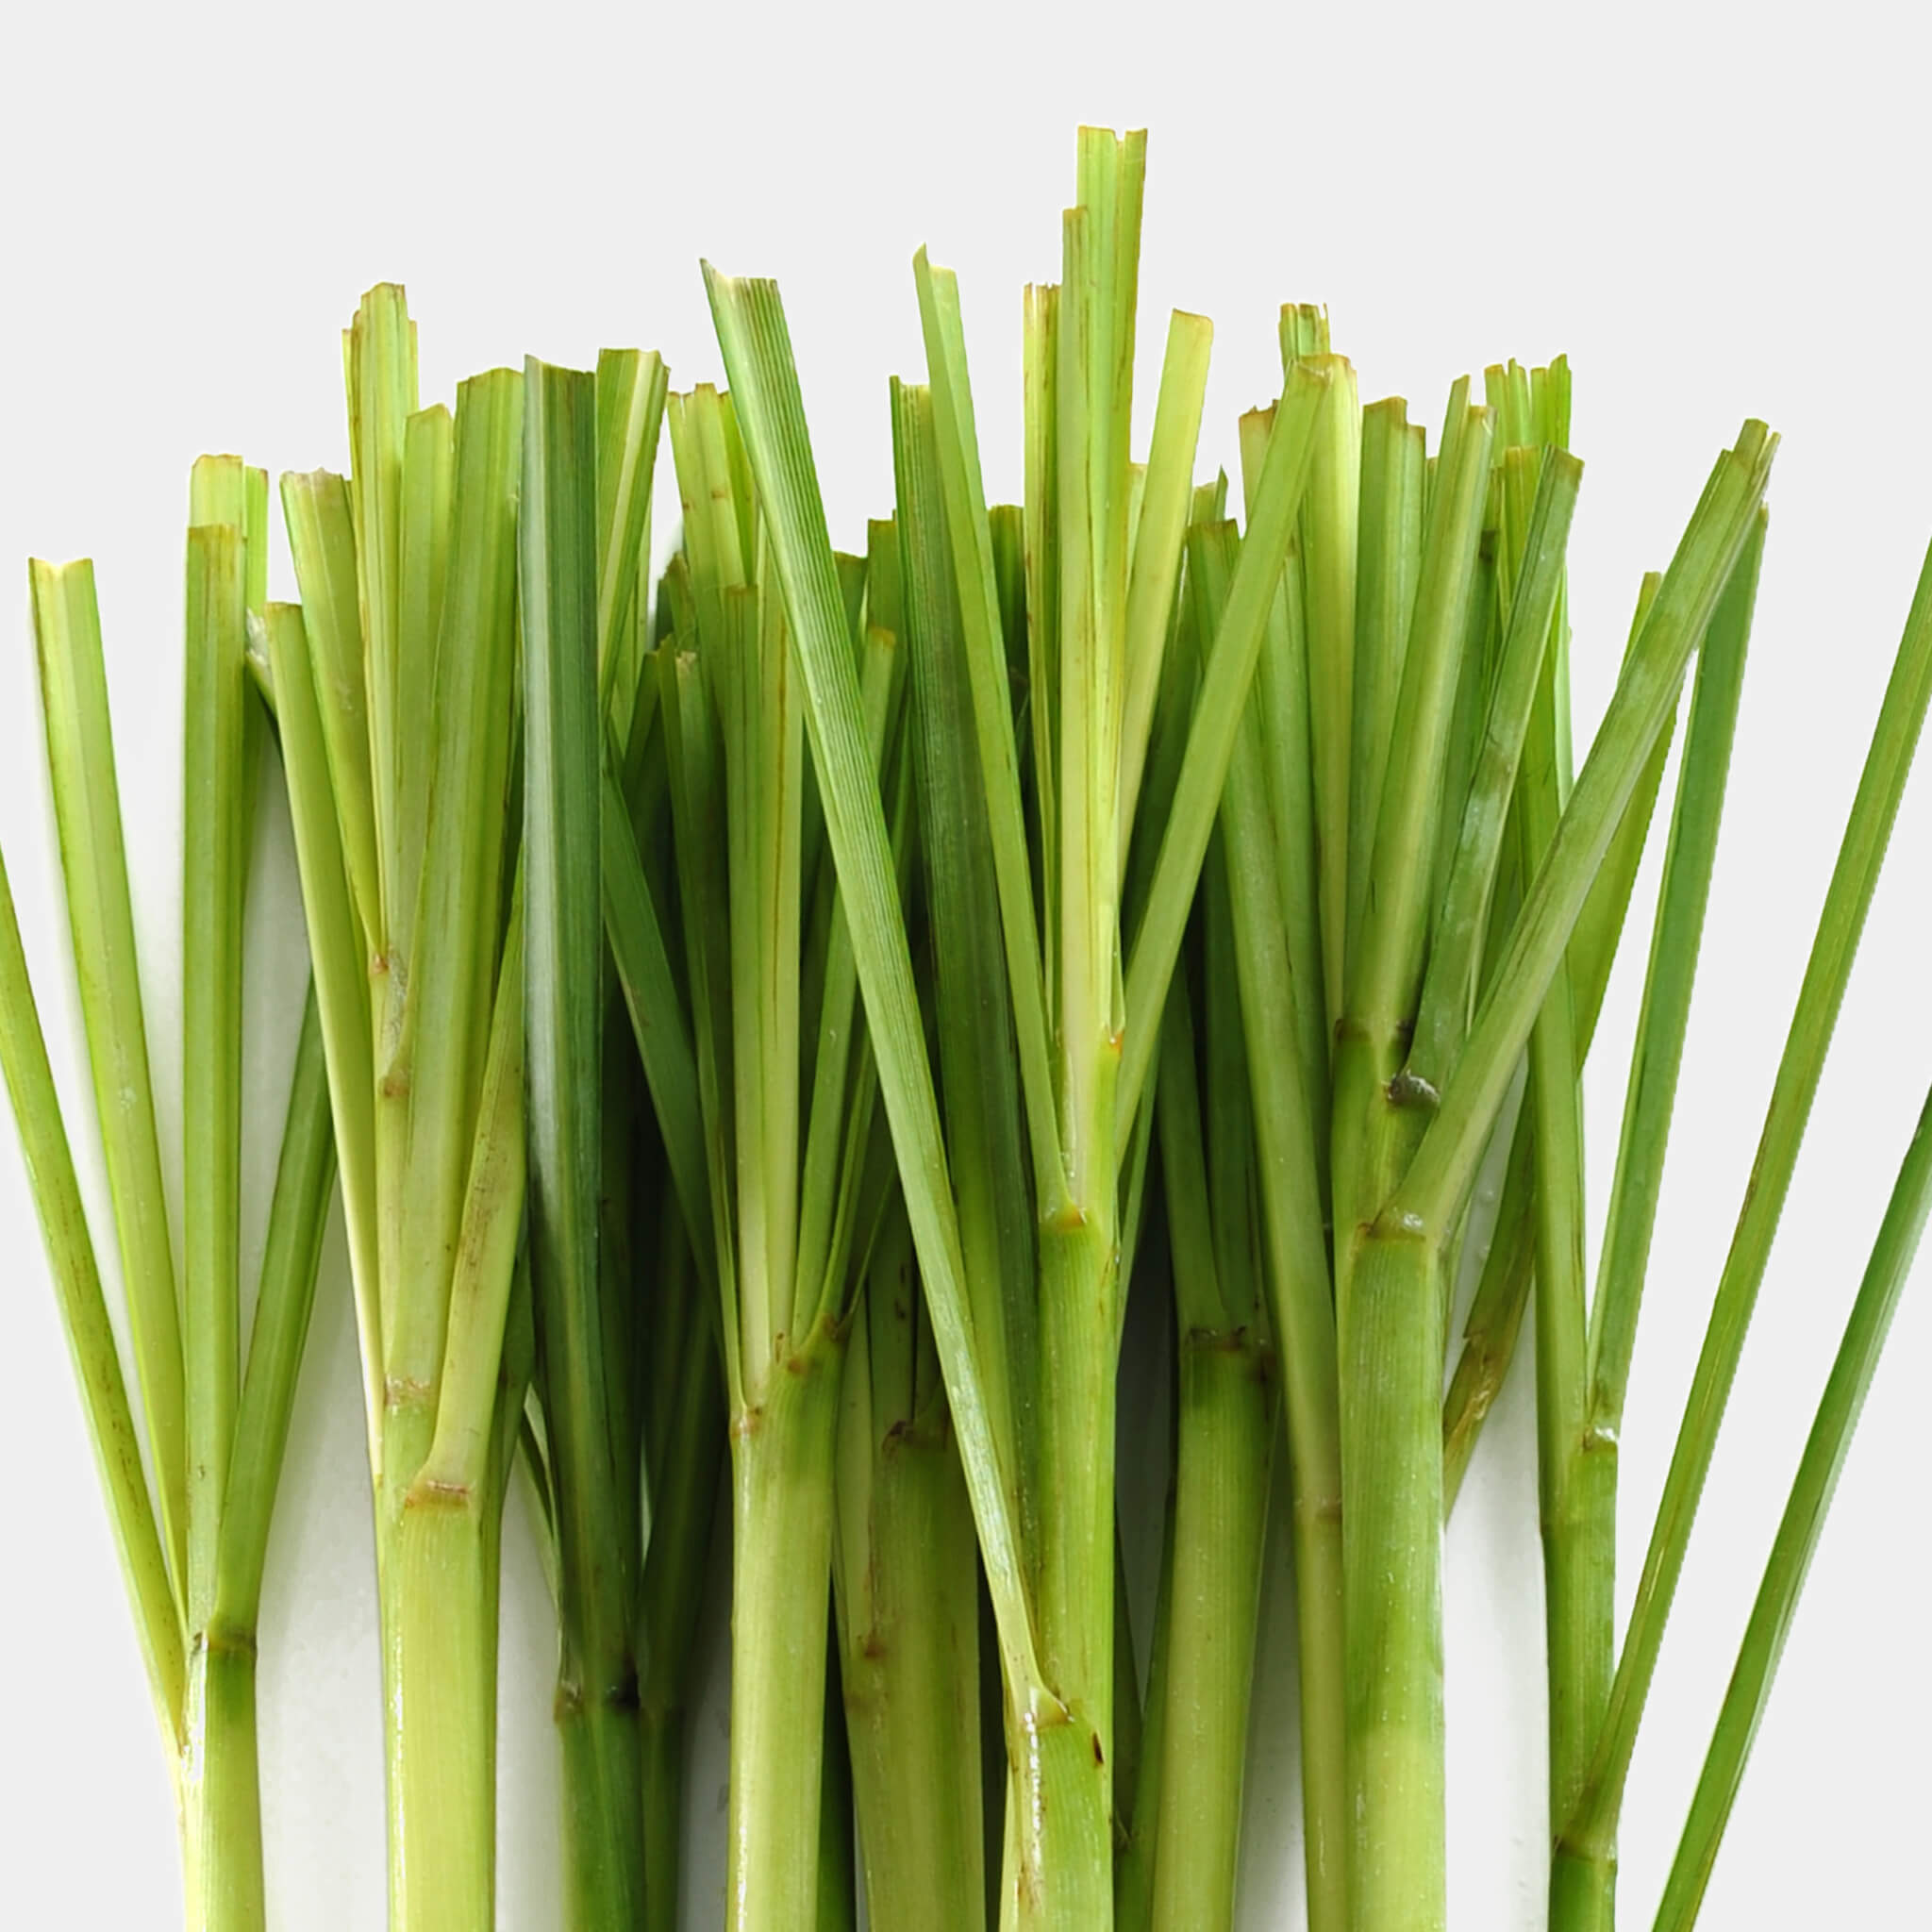 Product Page Key Ingredients: Lemongrass